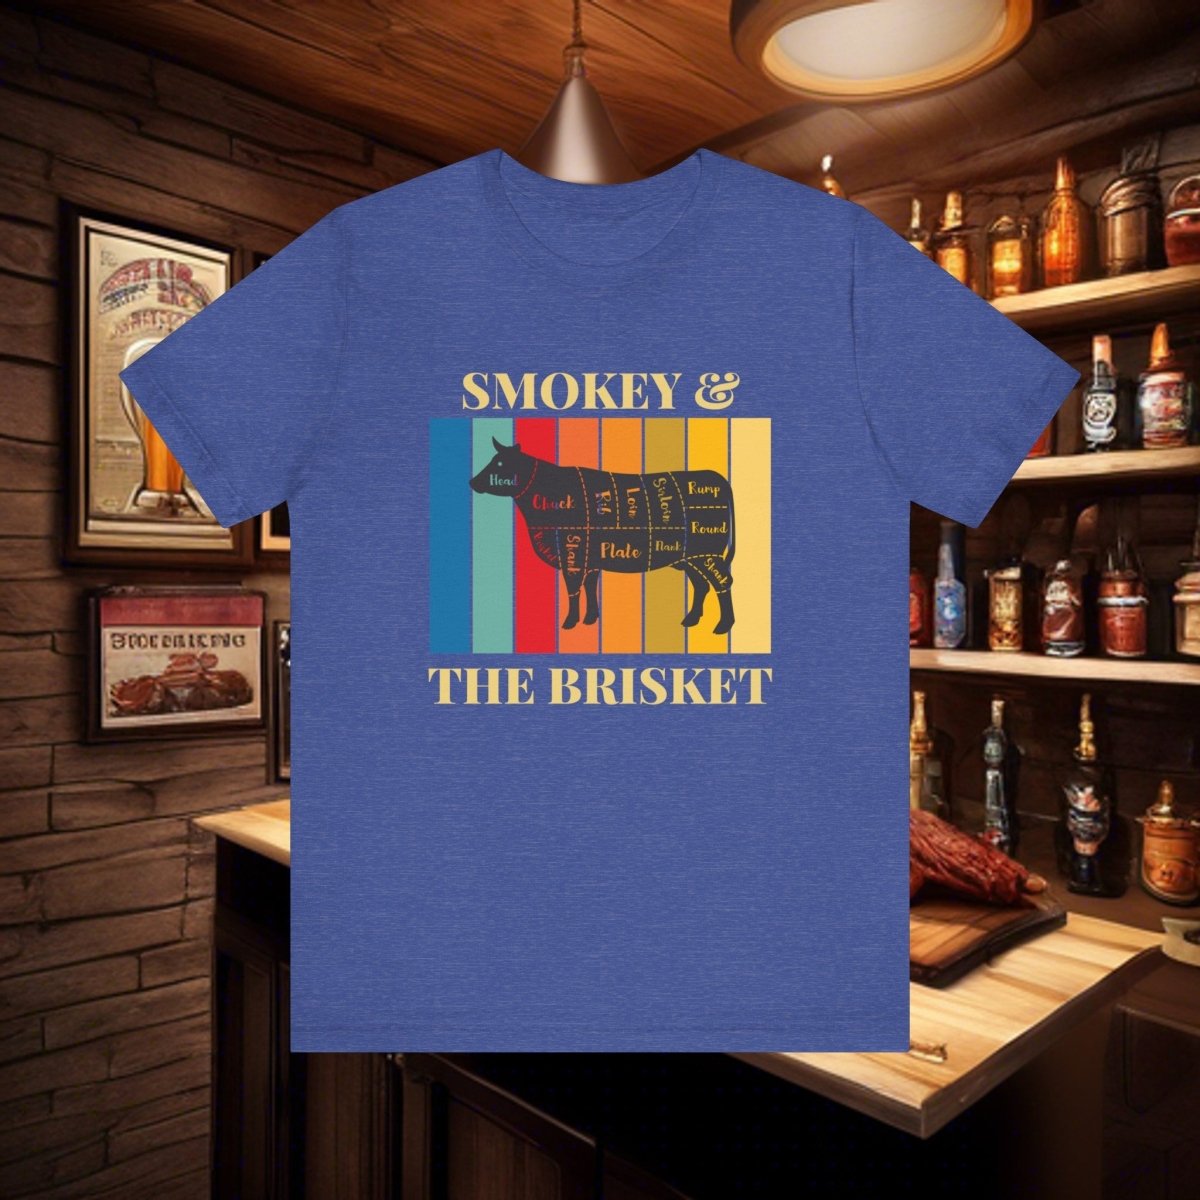 Smokey and The Brisket - Flaps 20 - Flaps 20 Sauce and Rub - T-Shirt